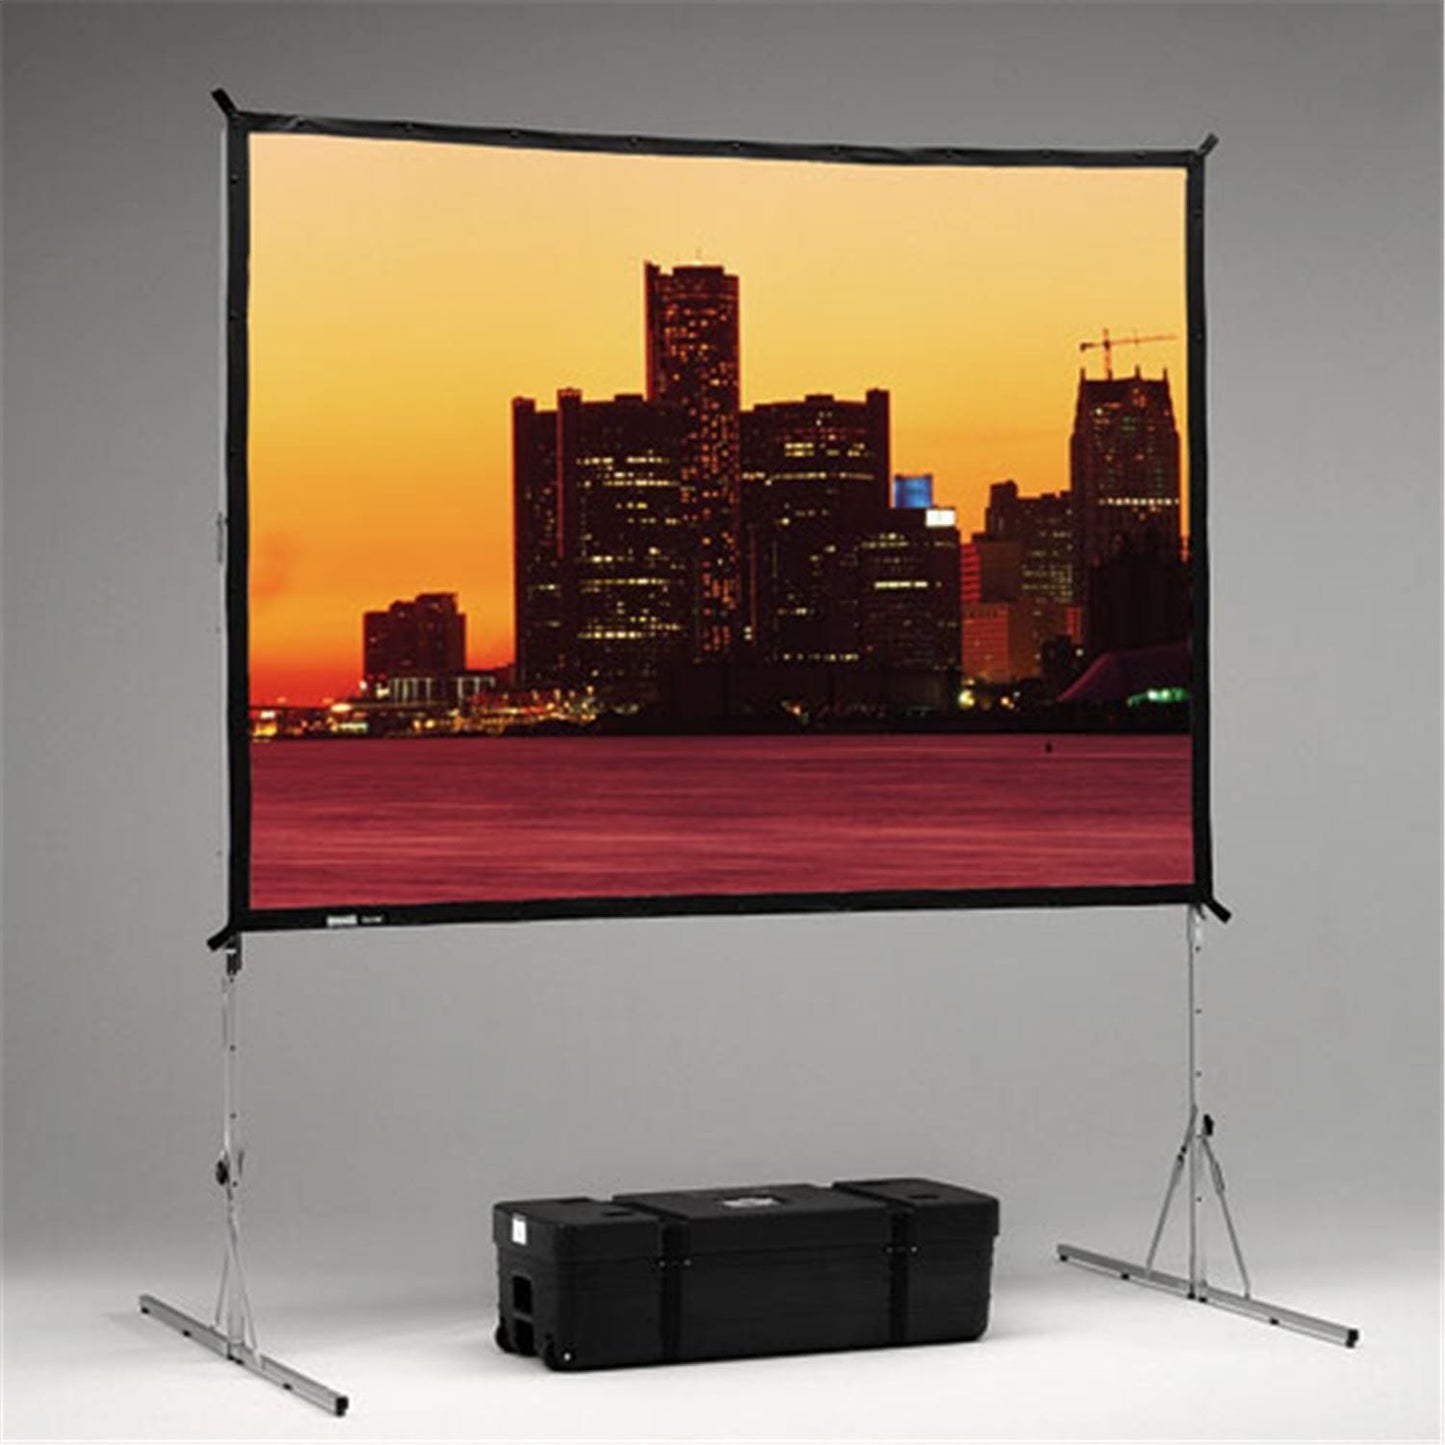 Dalite 40402 Fastfold 54 x 54 Portable Screen - ProSound and Stage Lighting